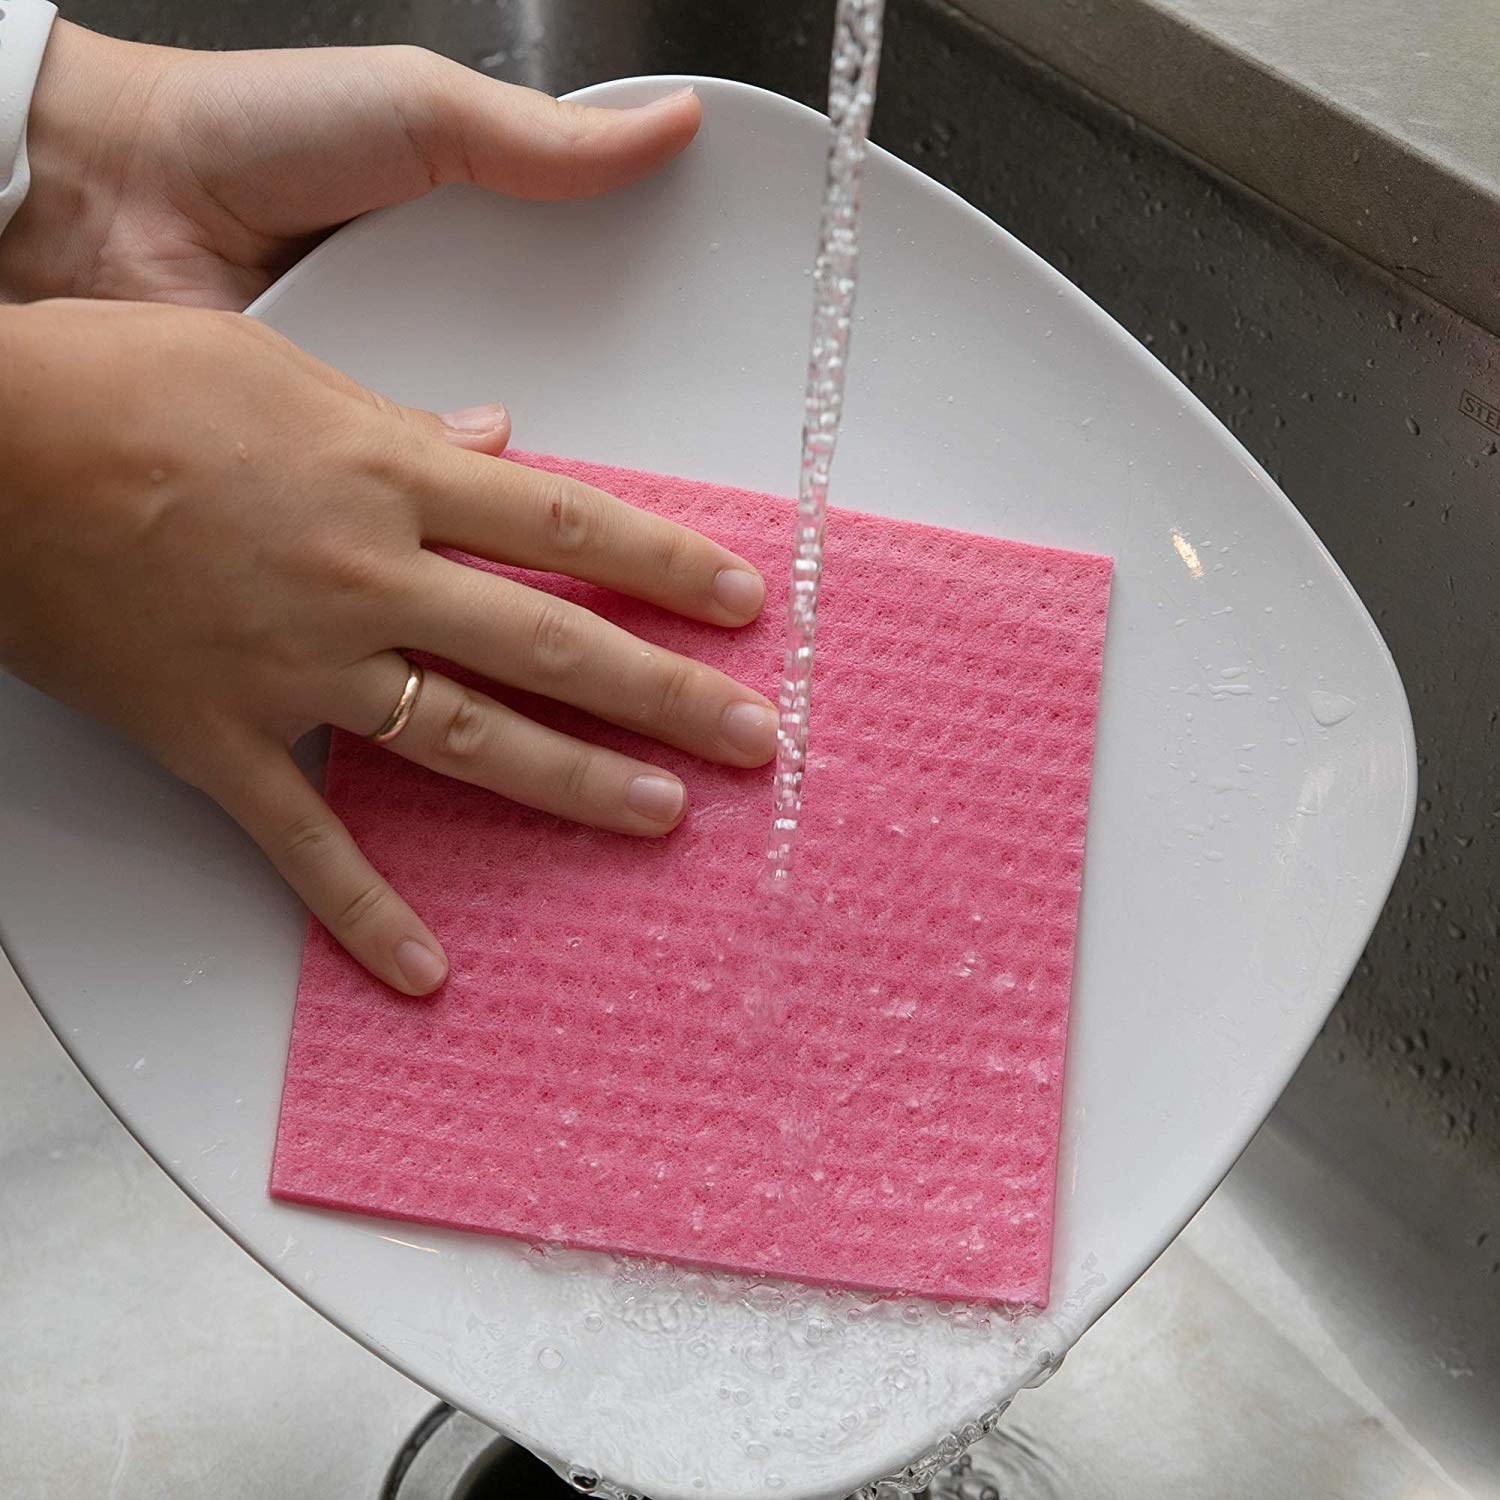 A dish being washed using a pink sponge cloth